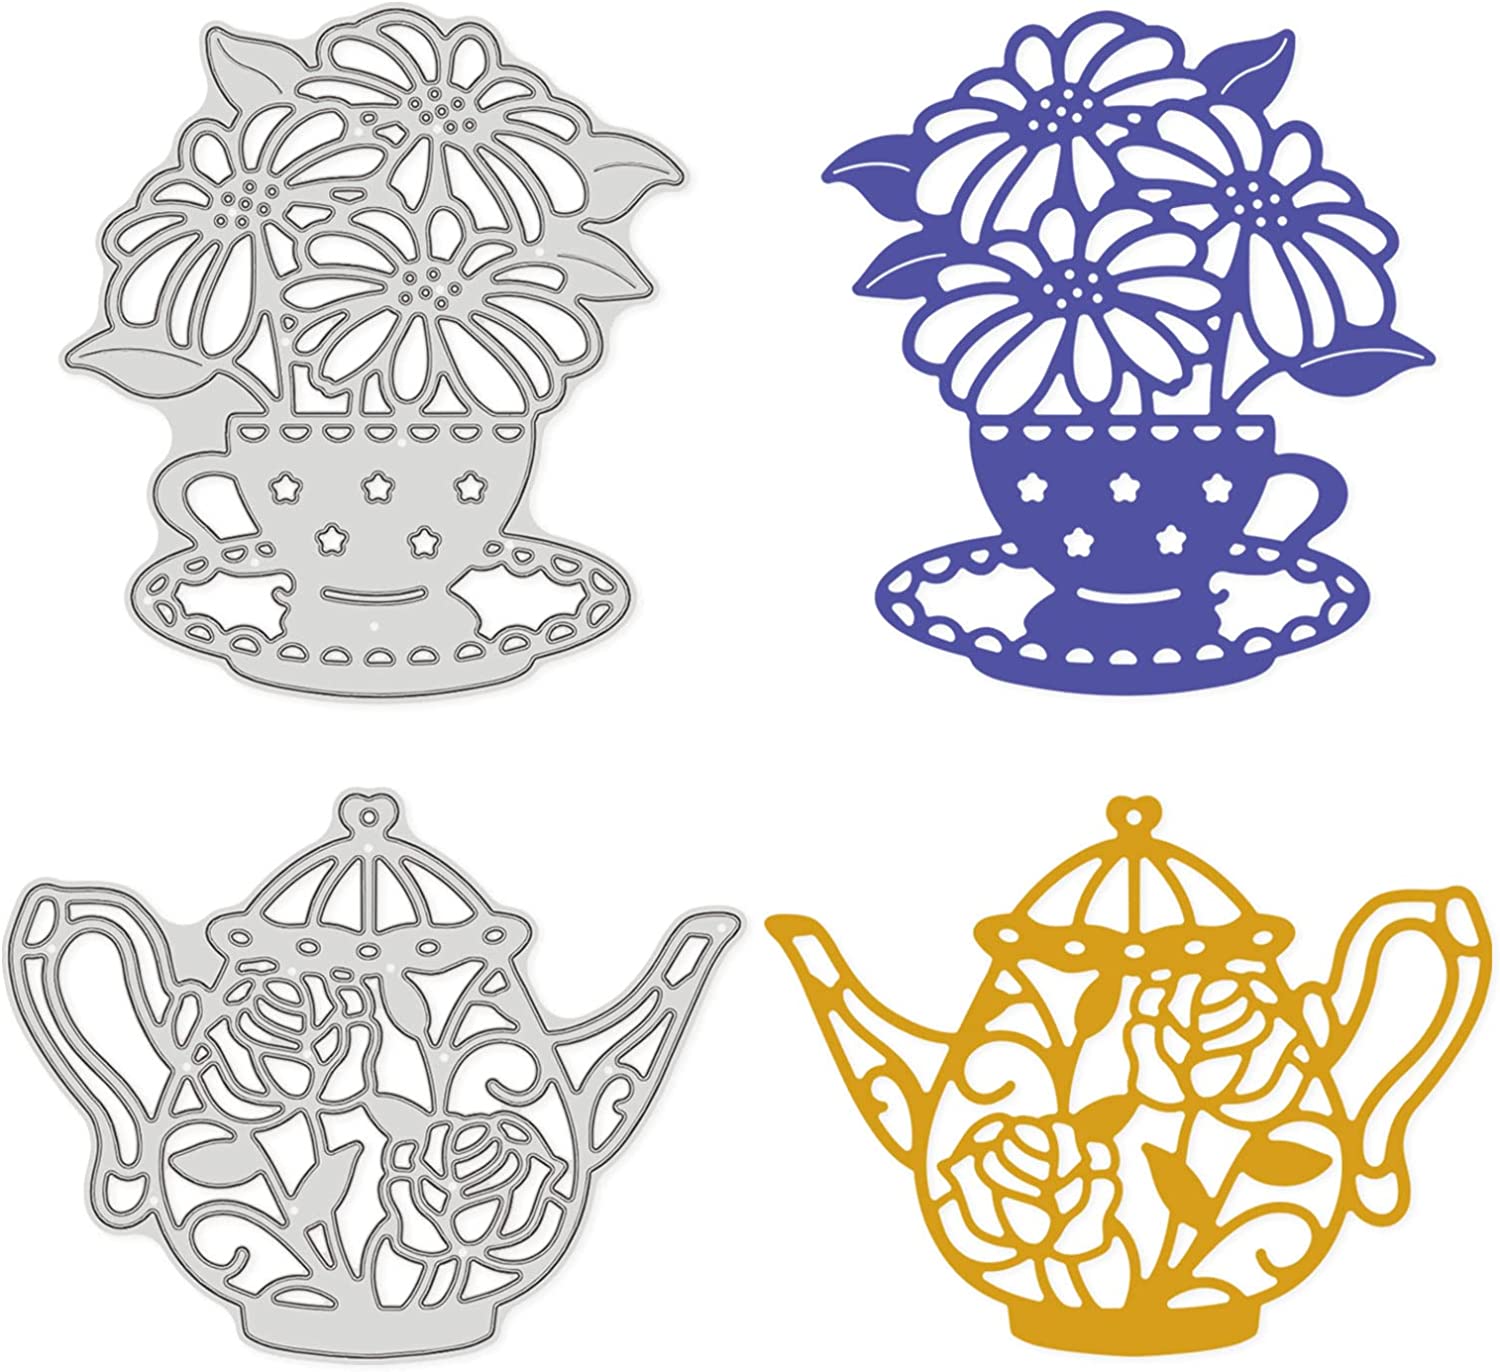 Pcs tea cup and teapot metal cutting dies daisy rose flower template for diy scrapbooking greeting card making album decoration